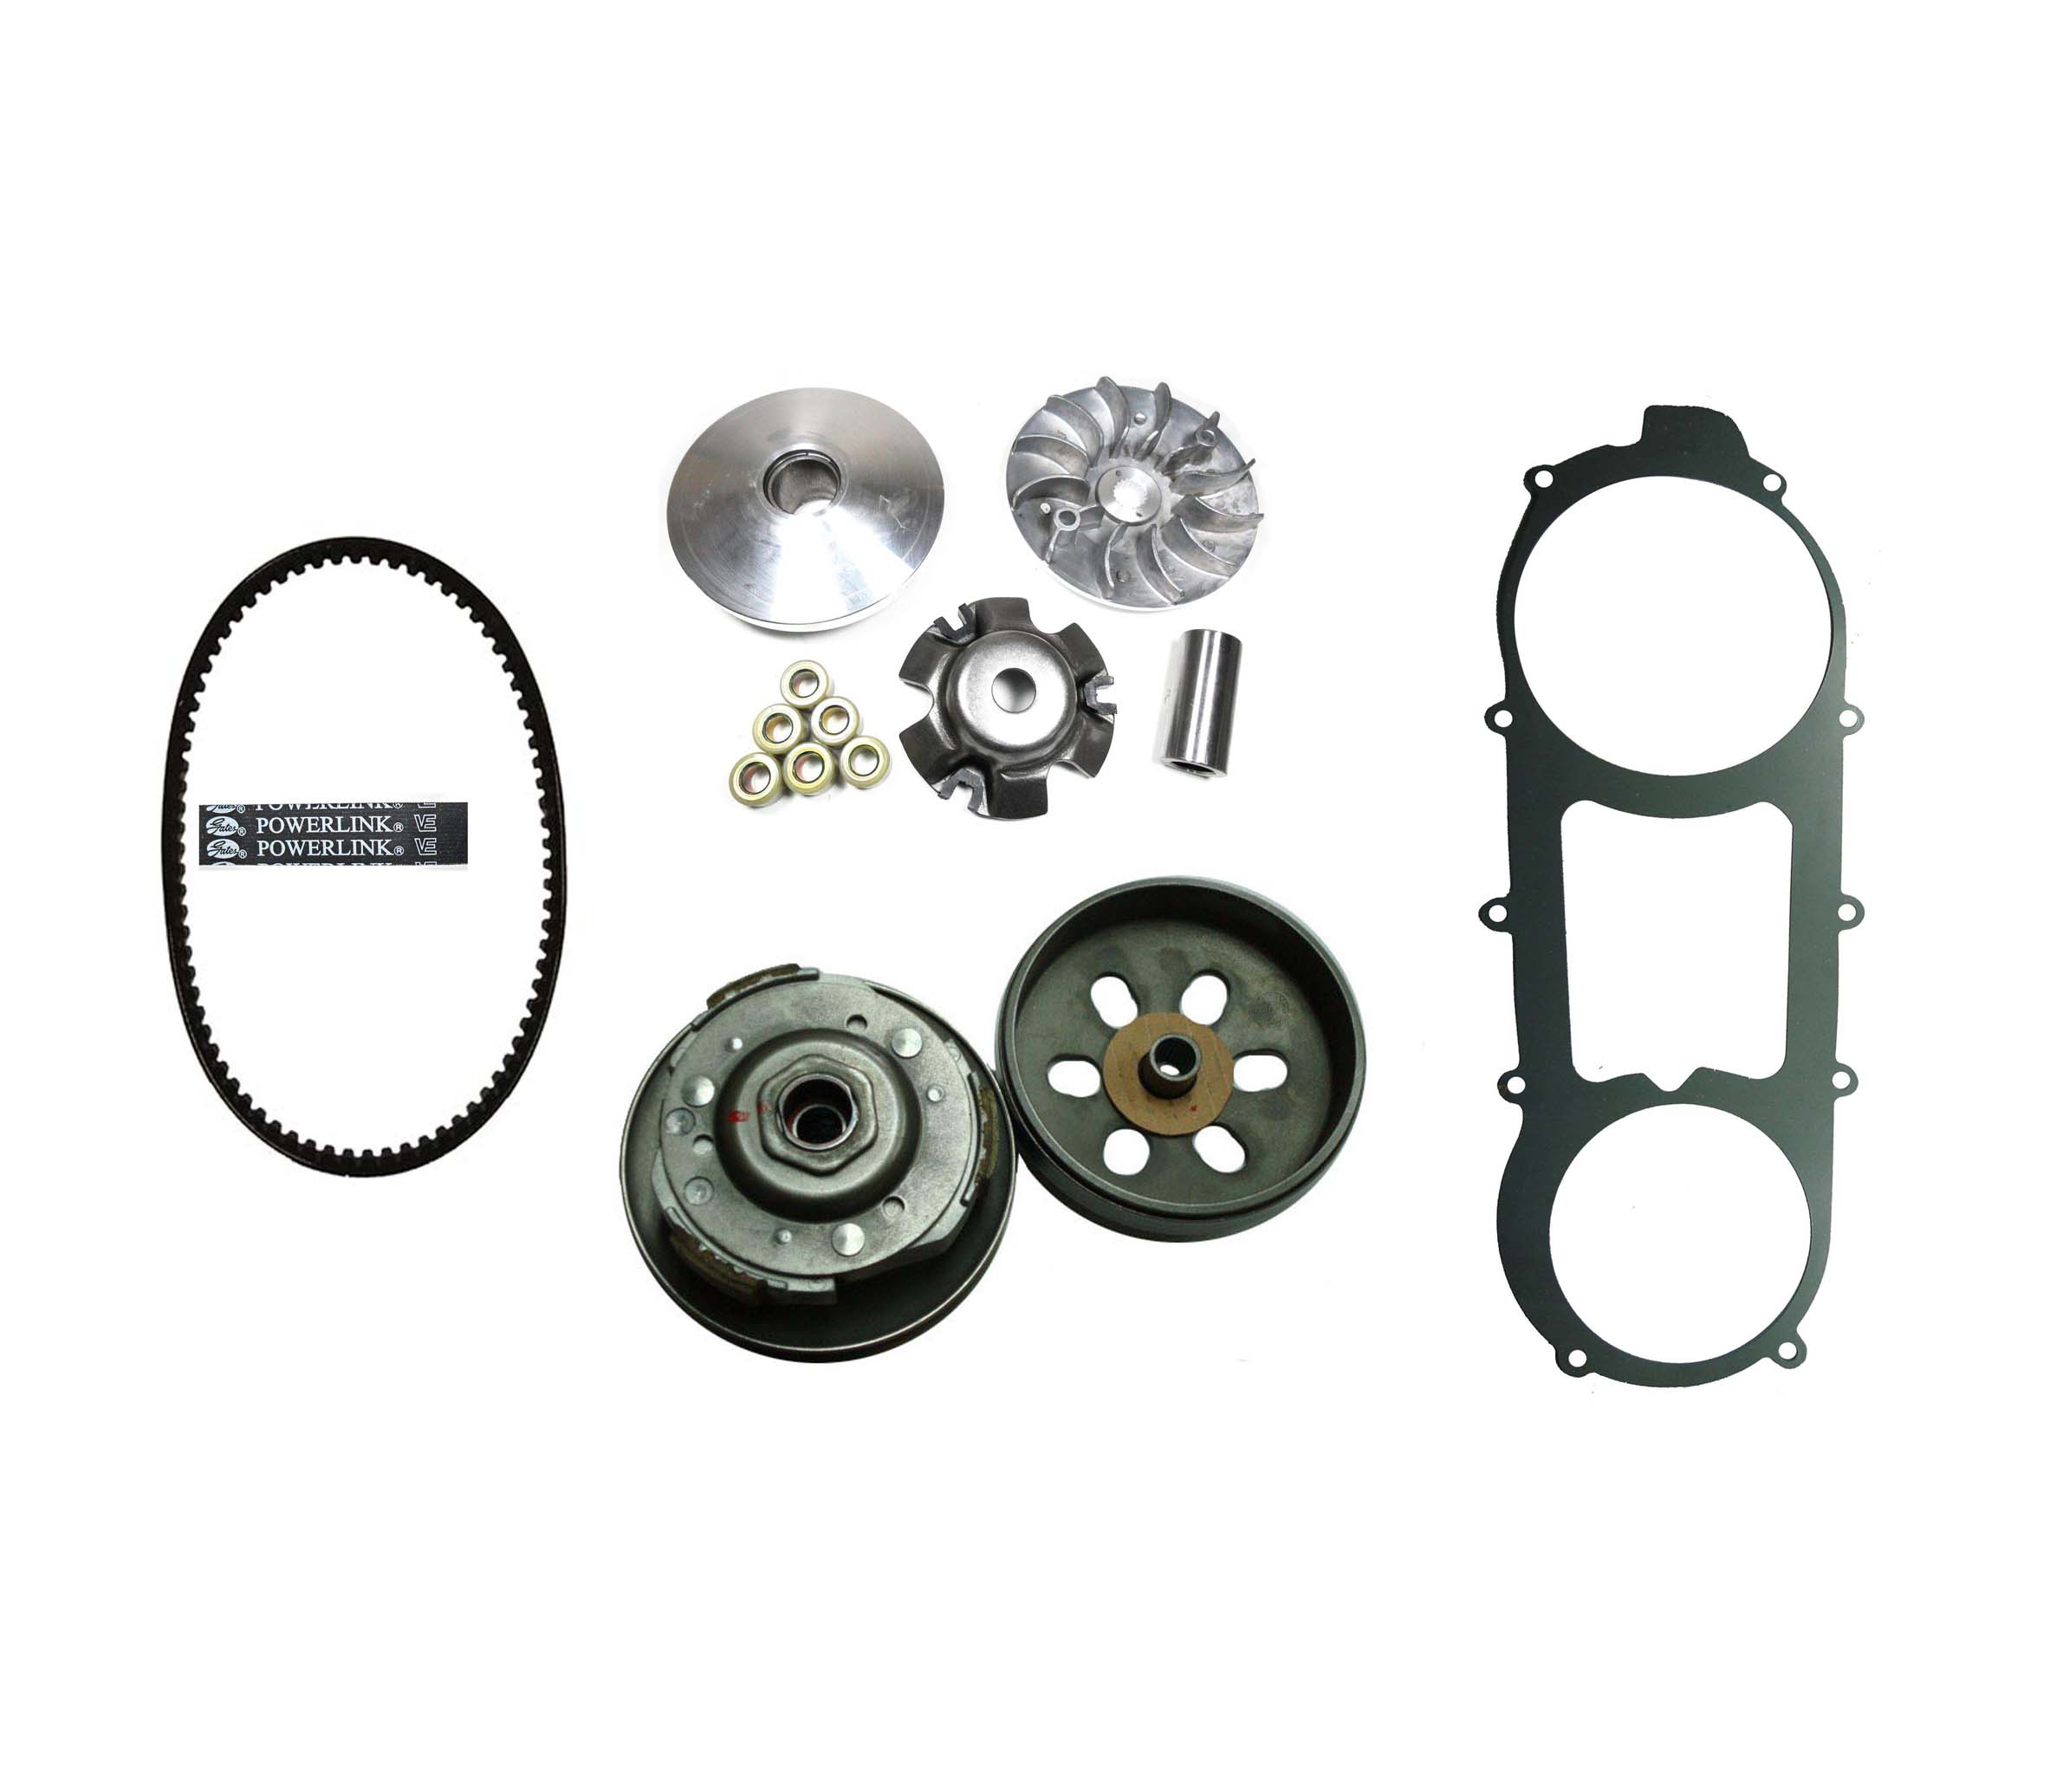 GY6-150 (150cc) Long Case Clutch & Belt Kit Front Clutch Variator, Rear Clutch Pulley, Powerlink Drive Belt & Belt Cover Gasket For units with the 842x20x30 Belt - Click Image to Close